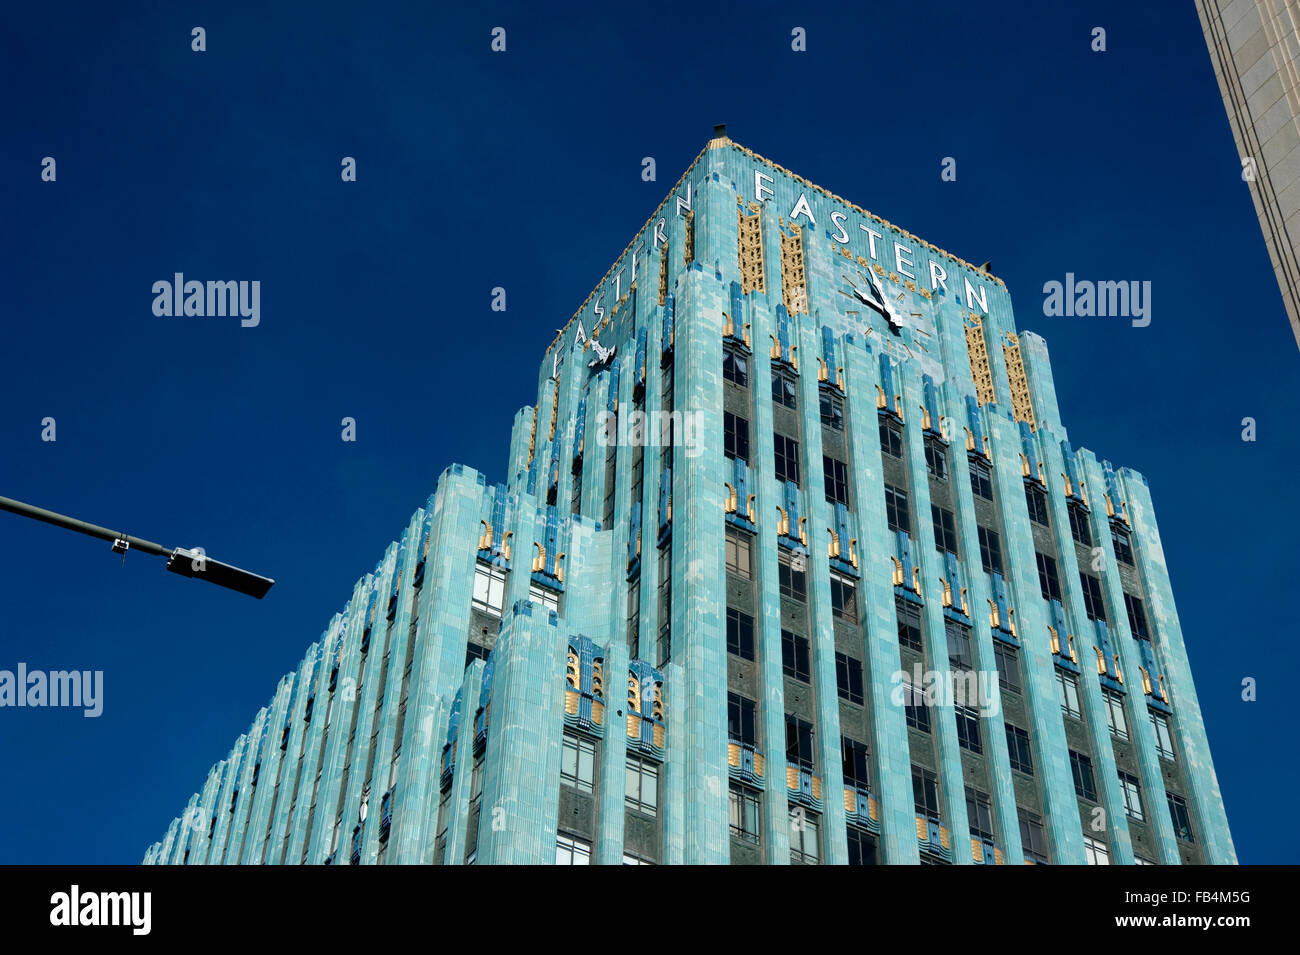 The art deco Eastern Building in downtown Los Angeles. Stock Photo